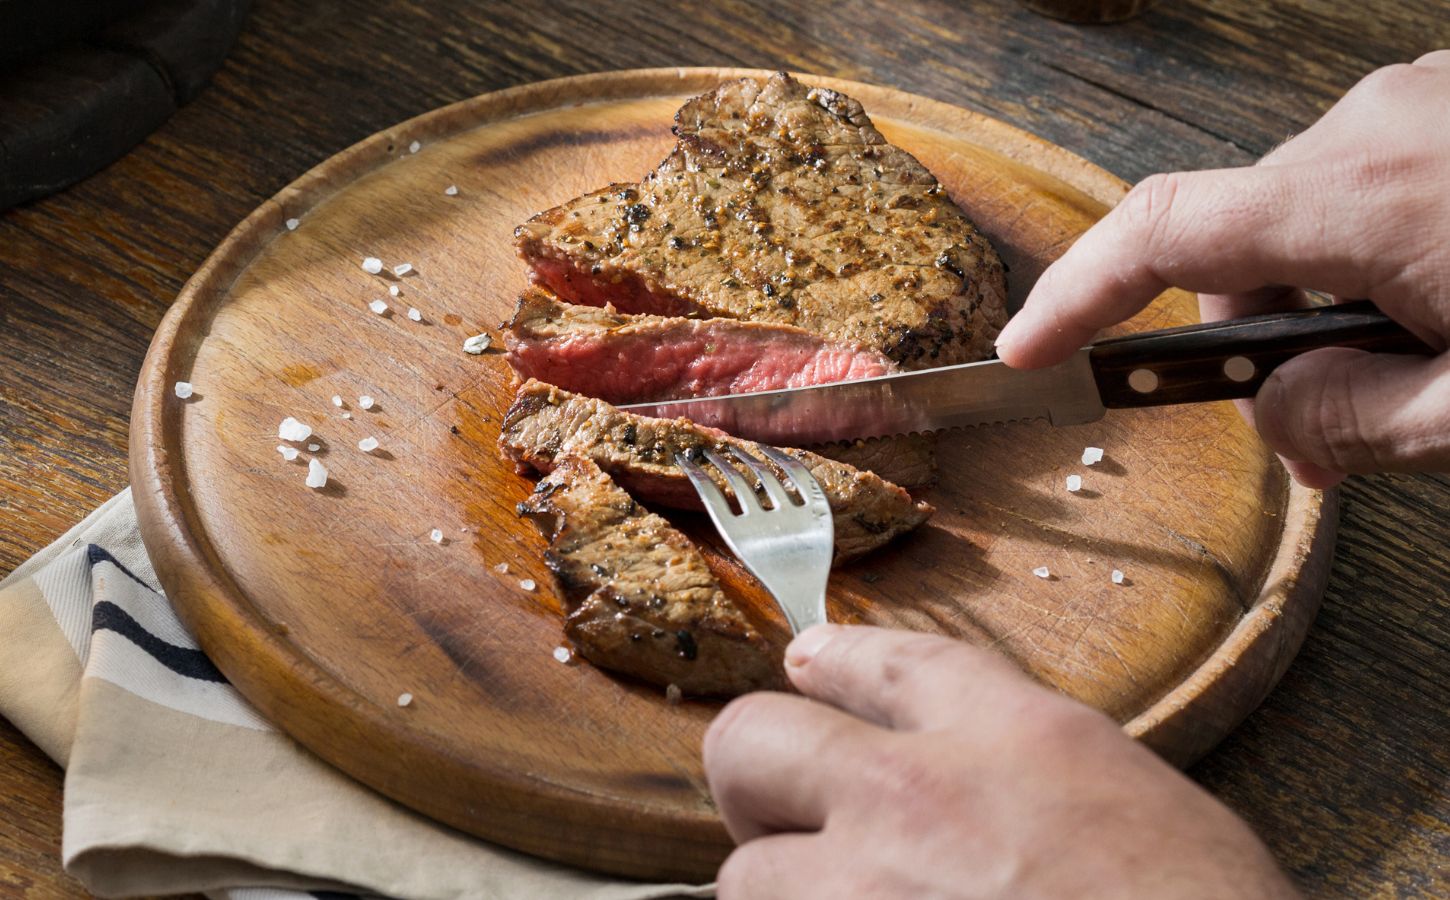 Man cutting red meat, which is linked to type 2 diabetes